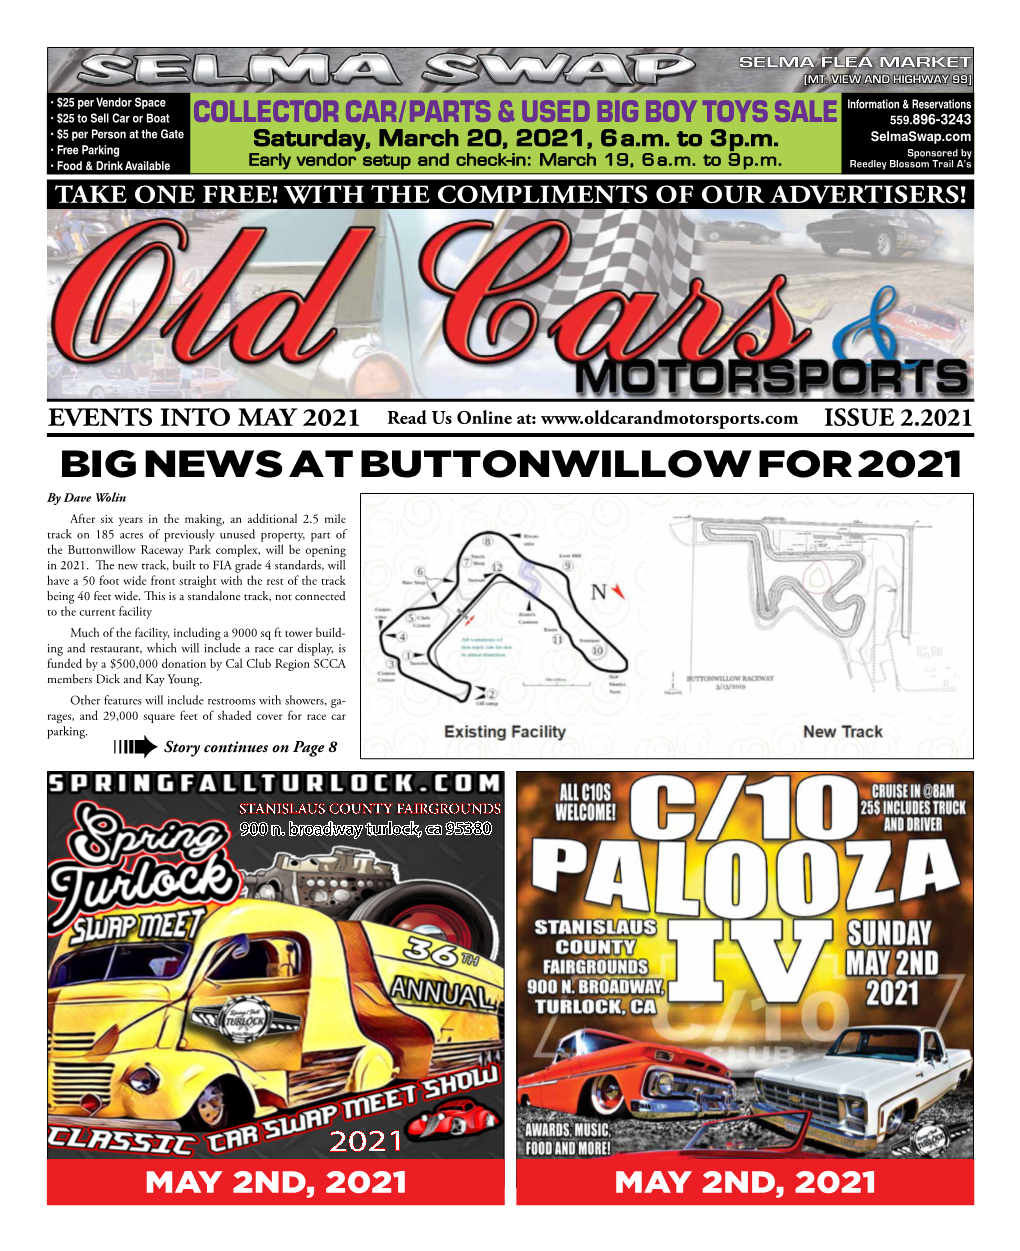 Big News at Buttonwillow for 2021